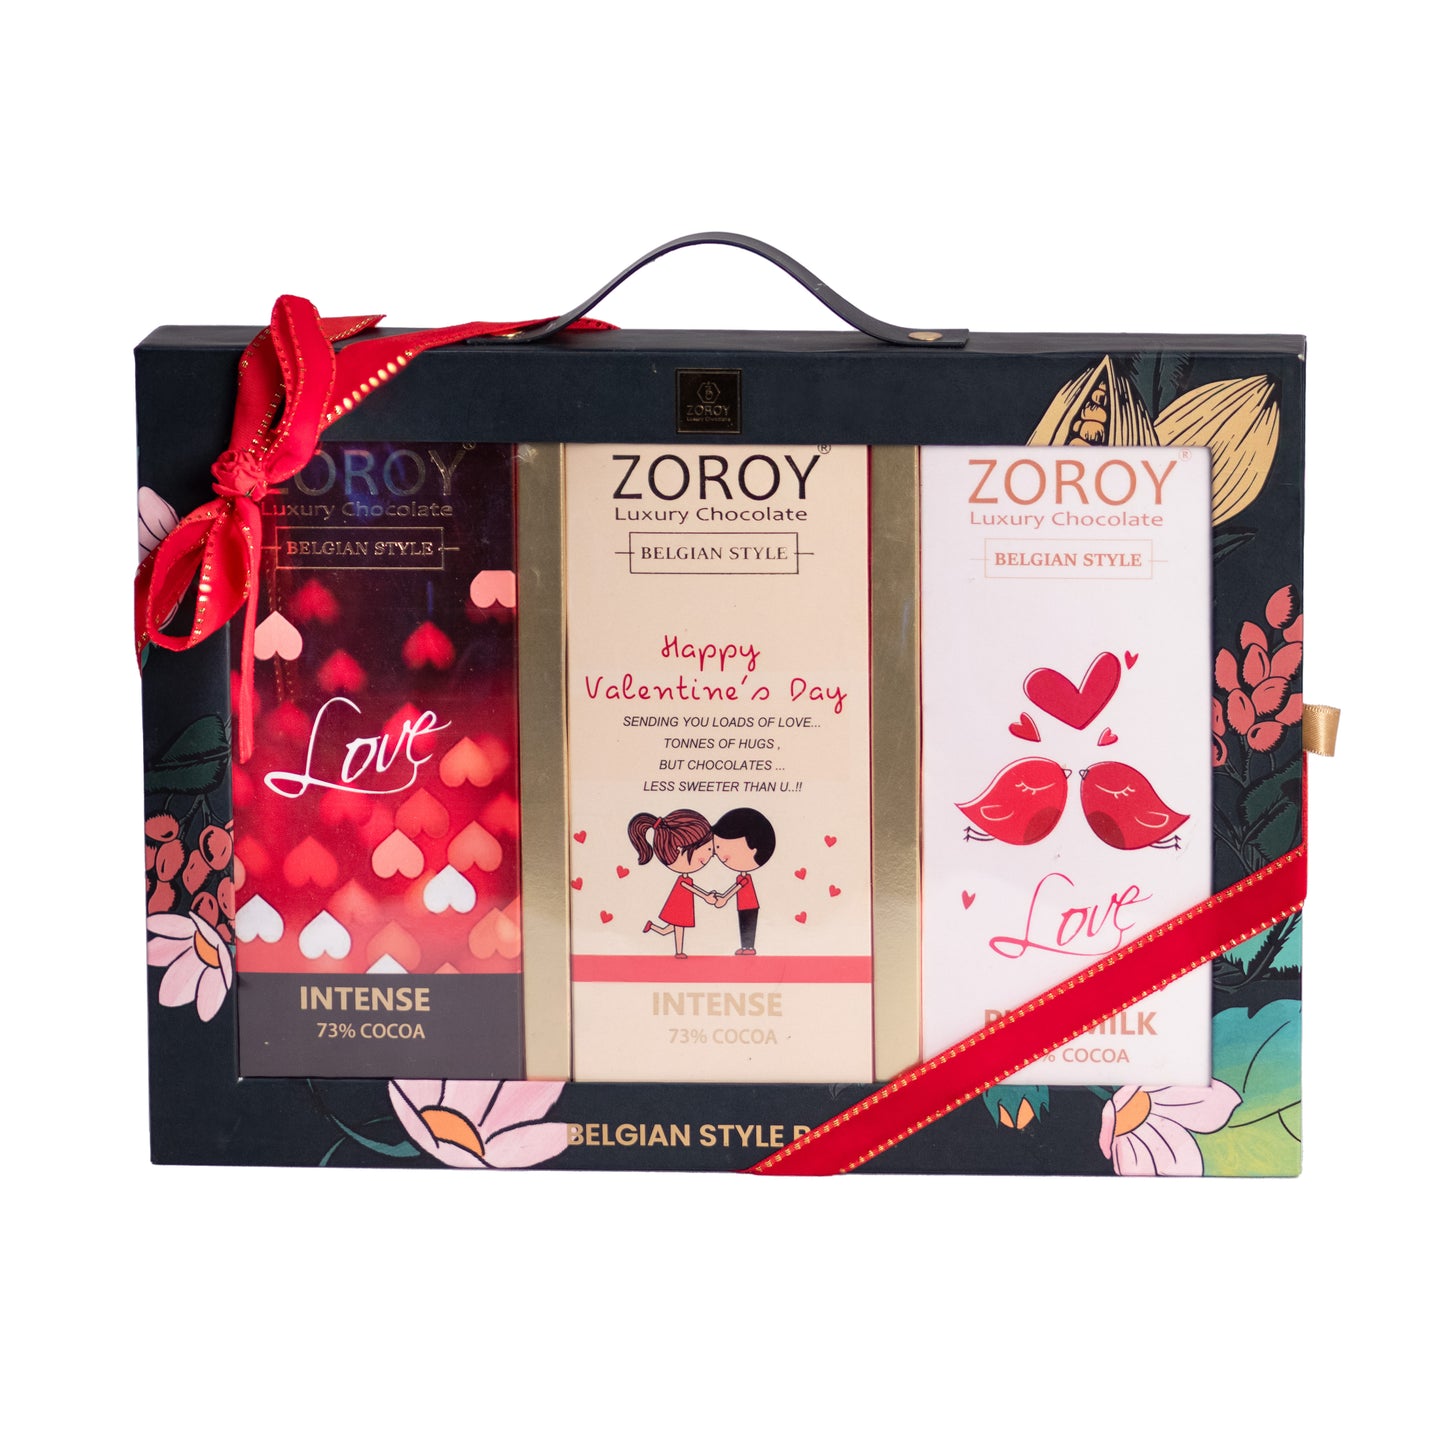 ZOROY Expressions of Love Bar set